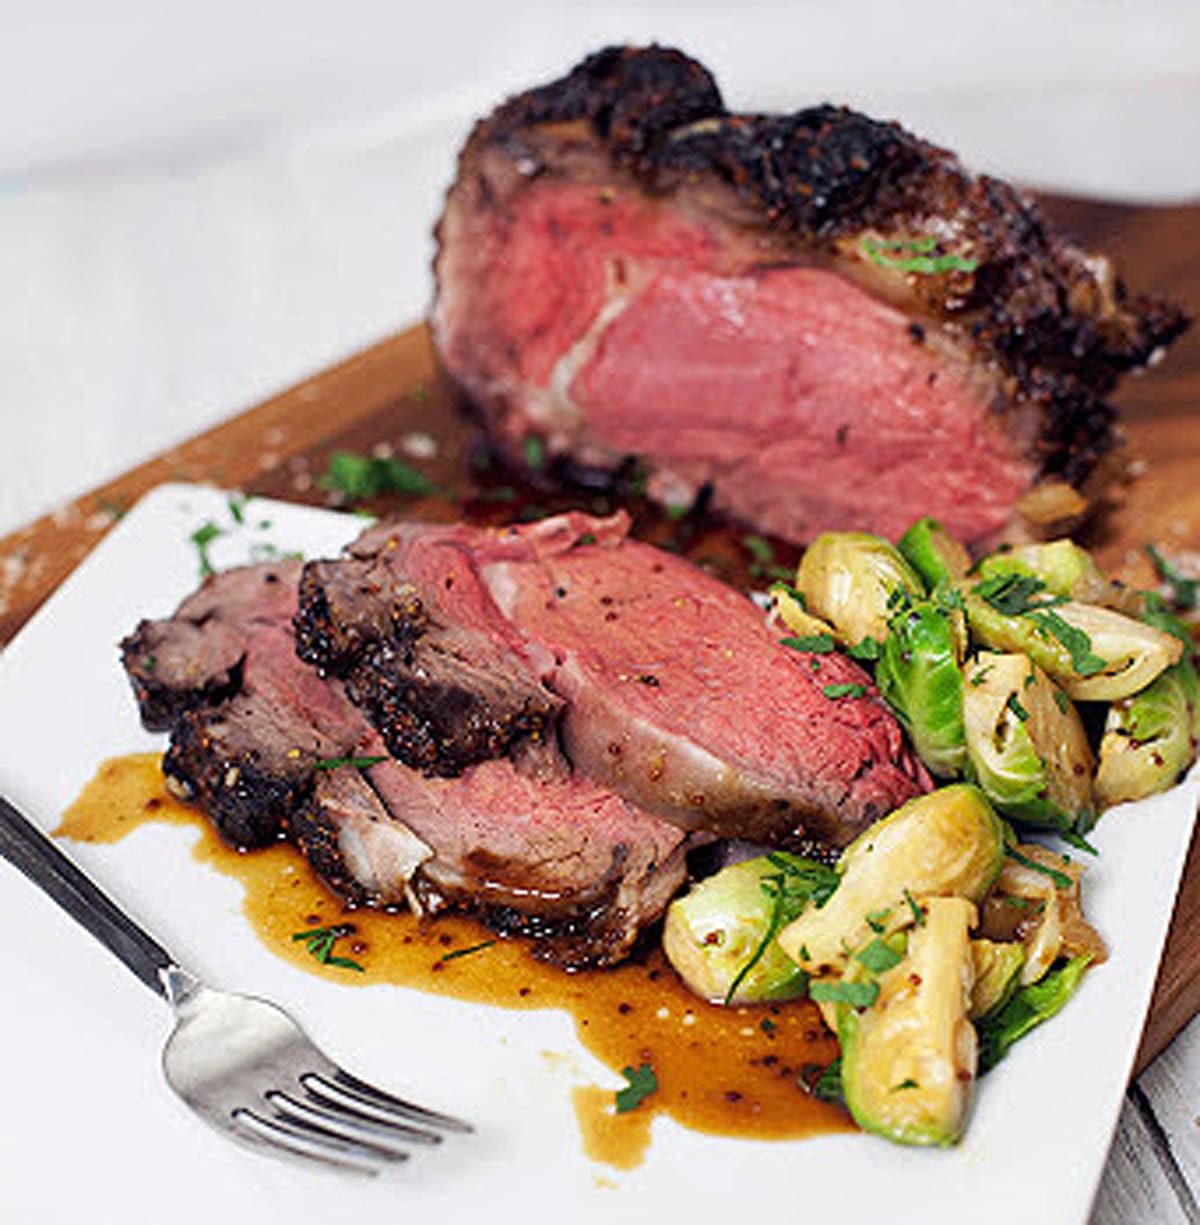 Roasted prime rib with brussel sprouts